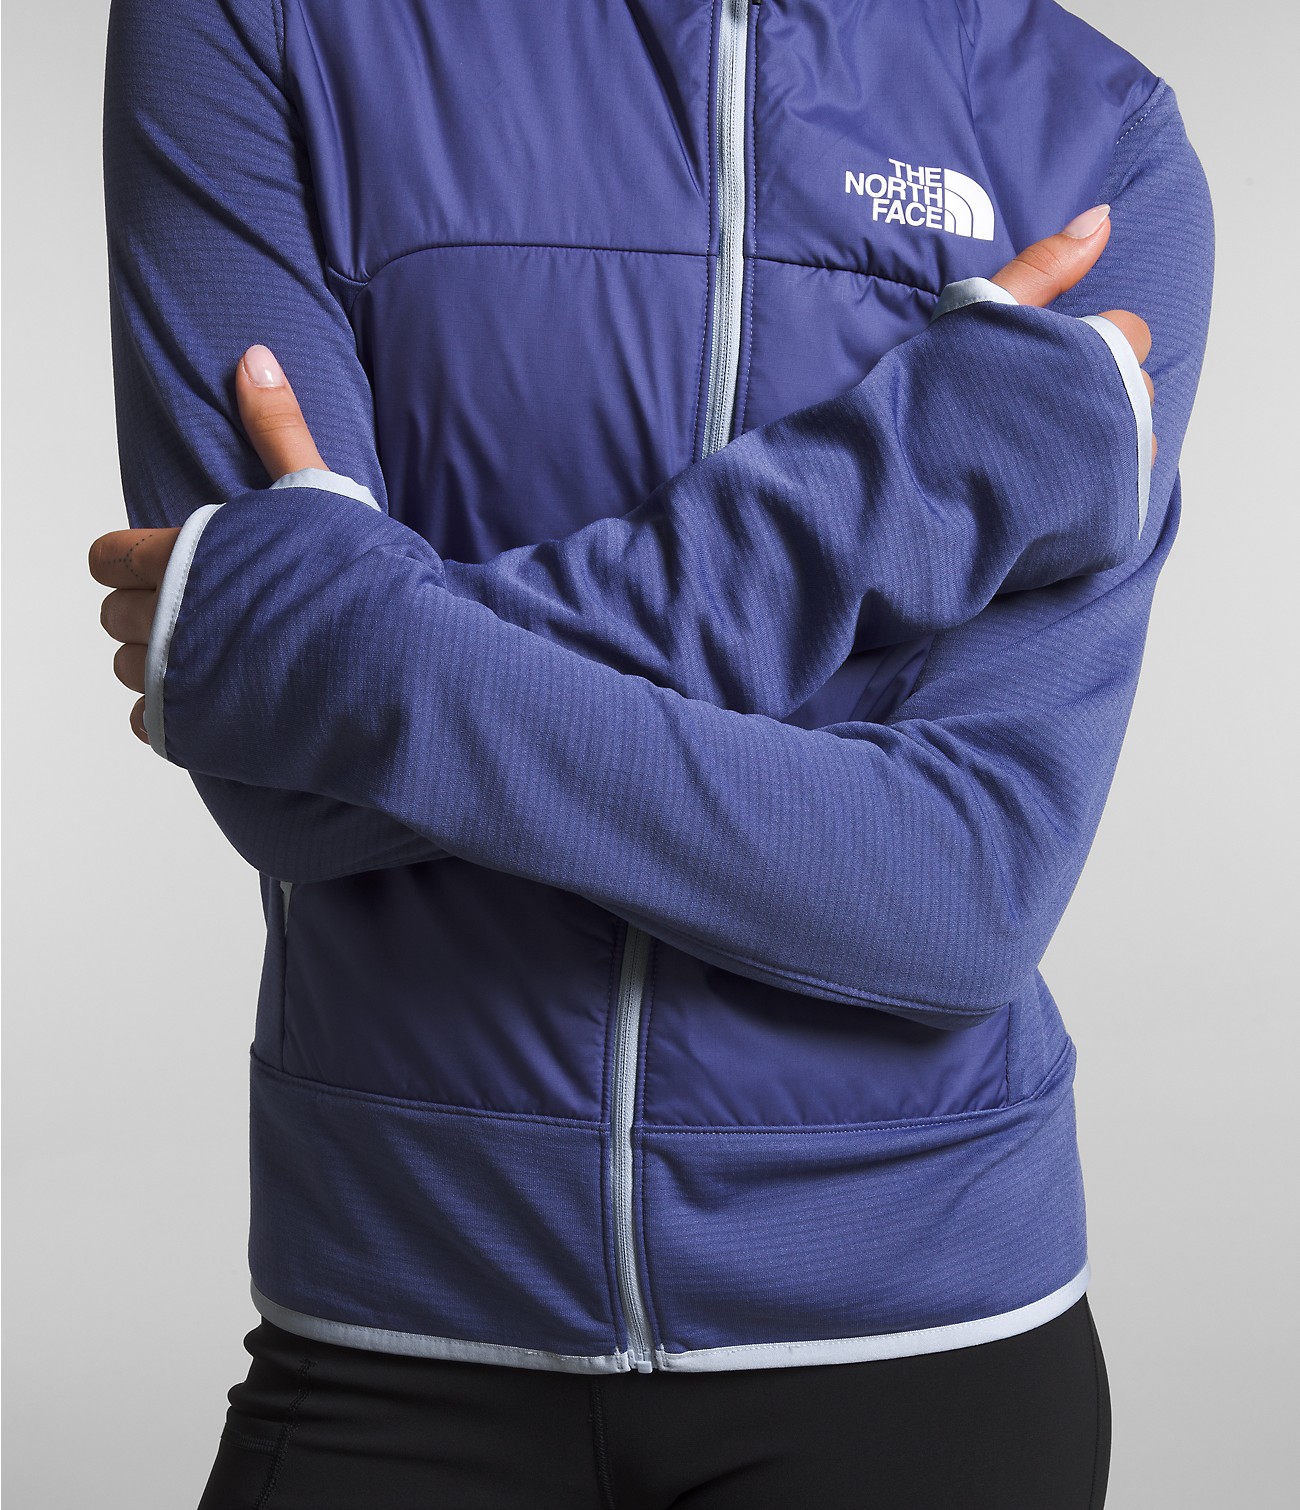 Women’s Winter Warm Pro Jacket | The North Face